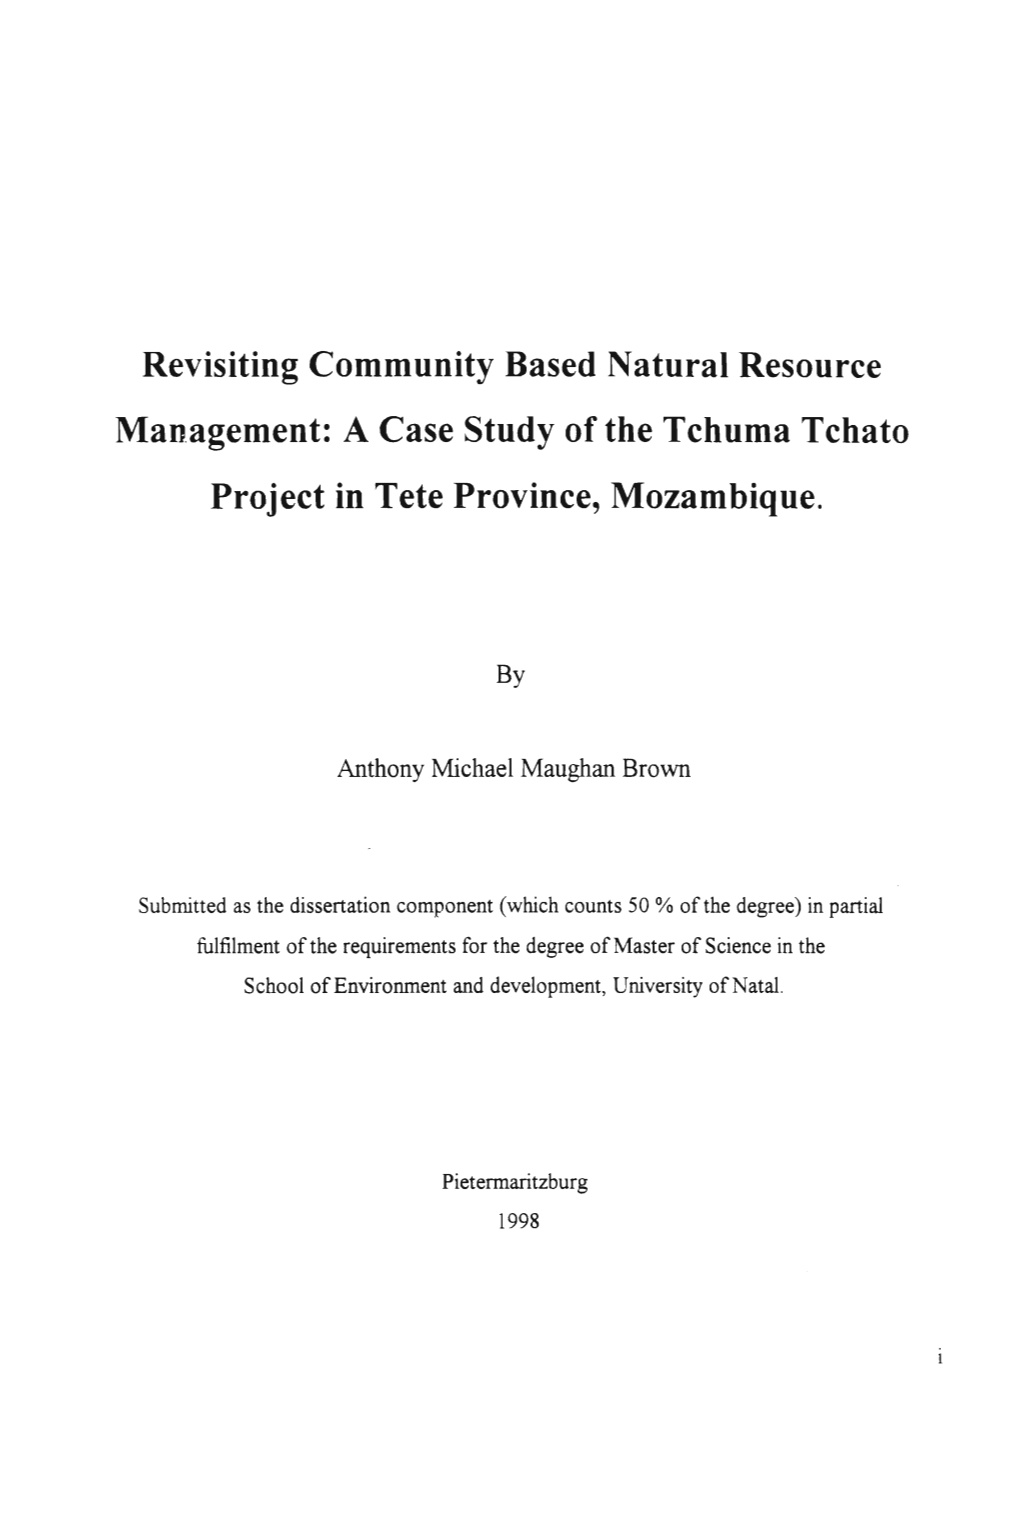 A Case Study of the Tchuma Tchato Project in Tete Province, Mozambique